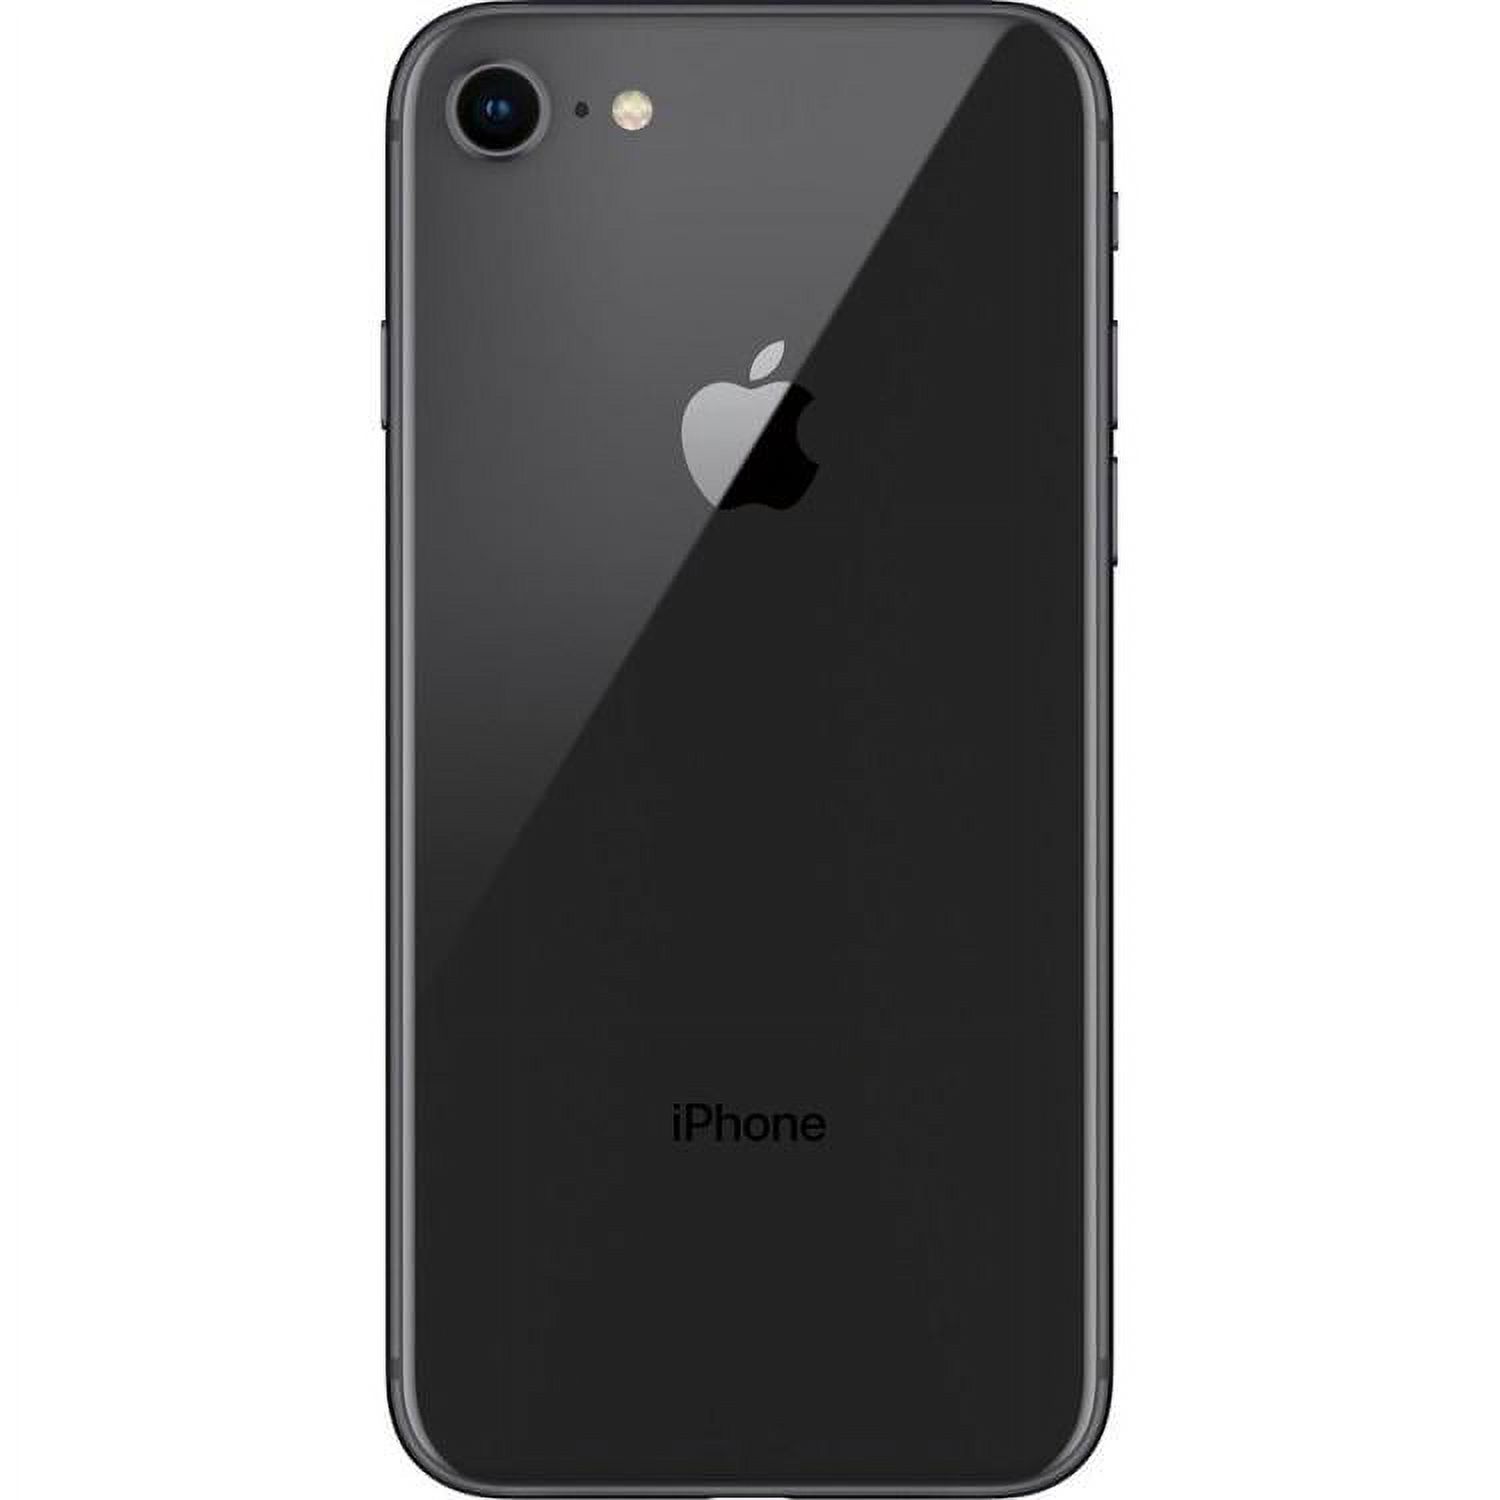 Pre-Owned Apple iPhone 8 - Sprint -  64GB - Space Gray (Refurbished: Good) - image 4 of 5